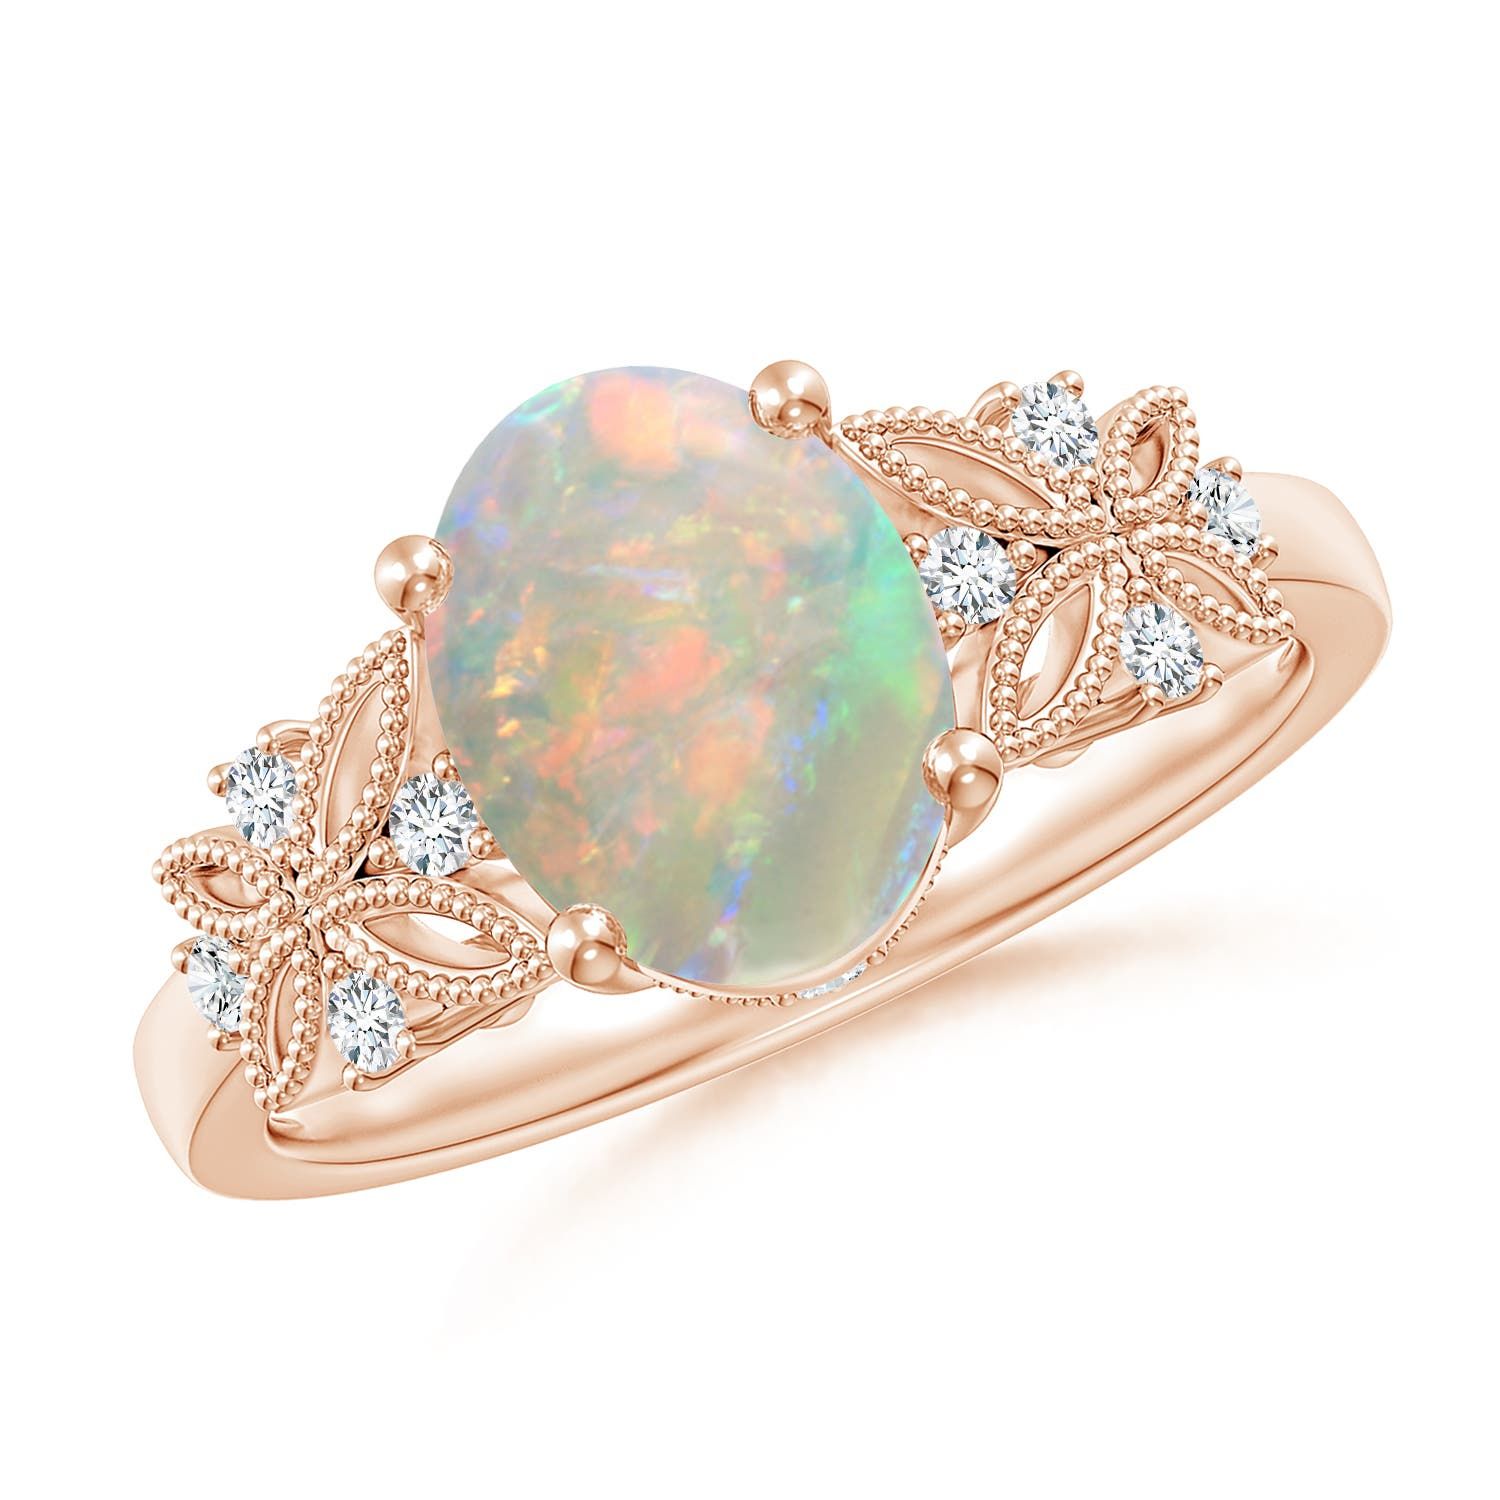 Vintage Style Oval Opal Ring With Diamonds | Angara Pertaining To Oval Opal Rings With Diamond Side Accents (View 25 of 25)